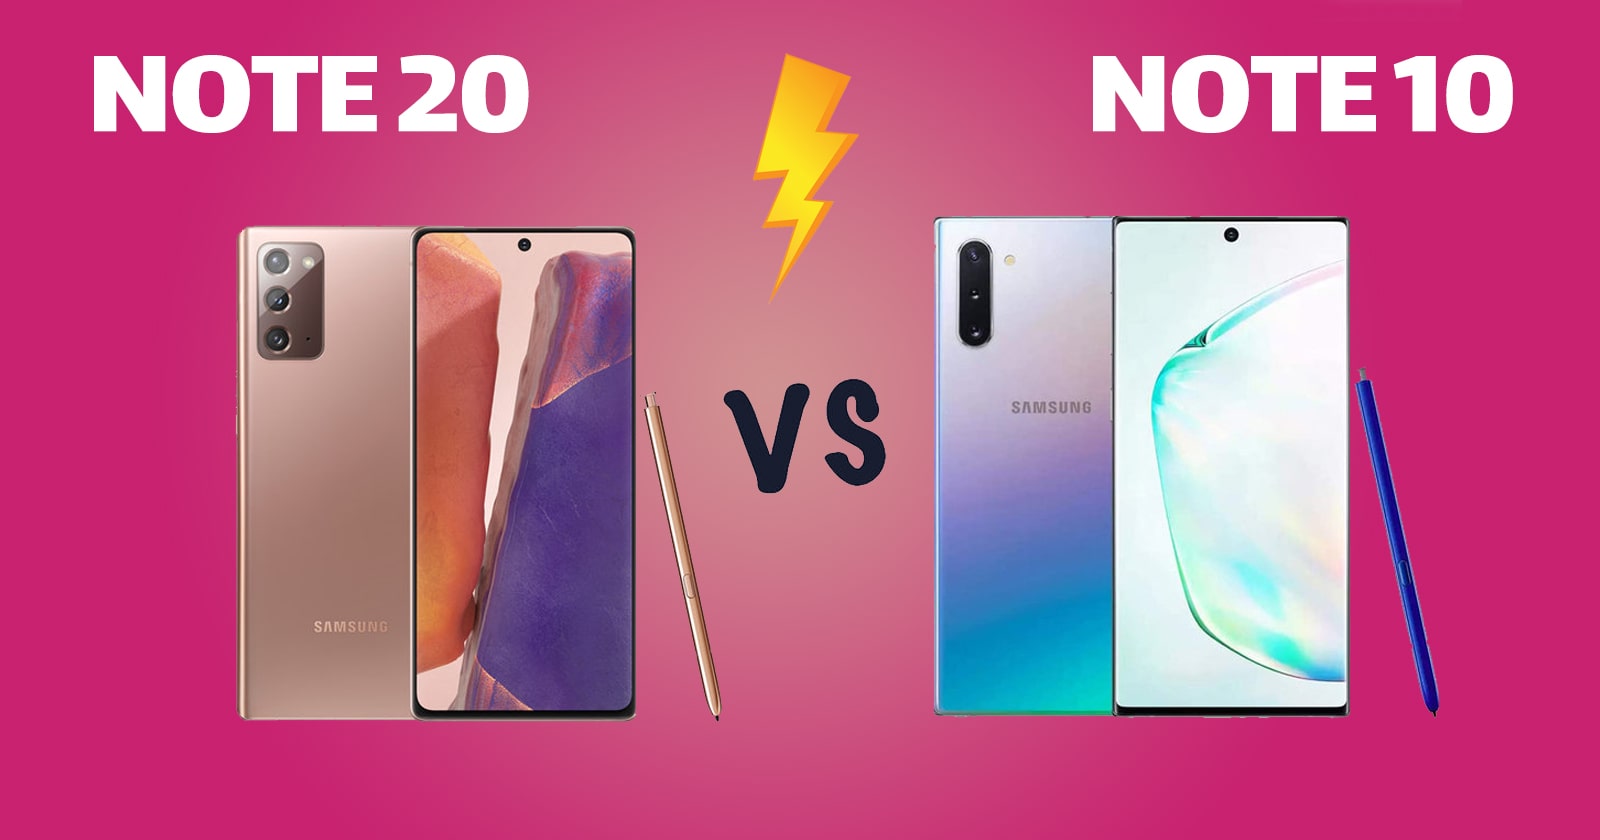 What Is the Difference Between Samsung Note 10 and Note 20